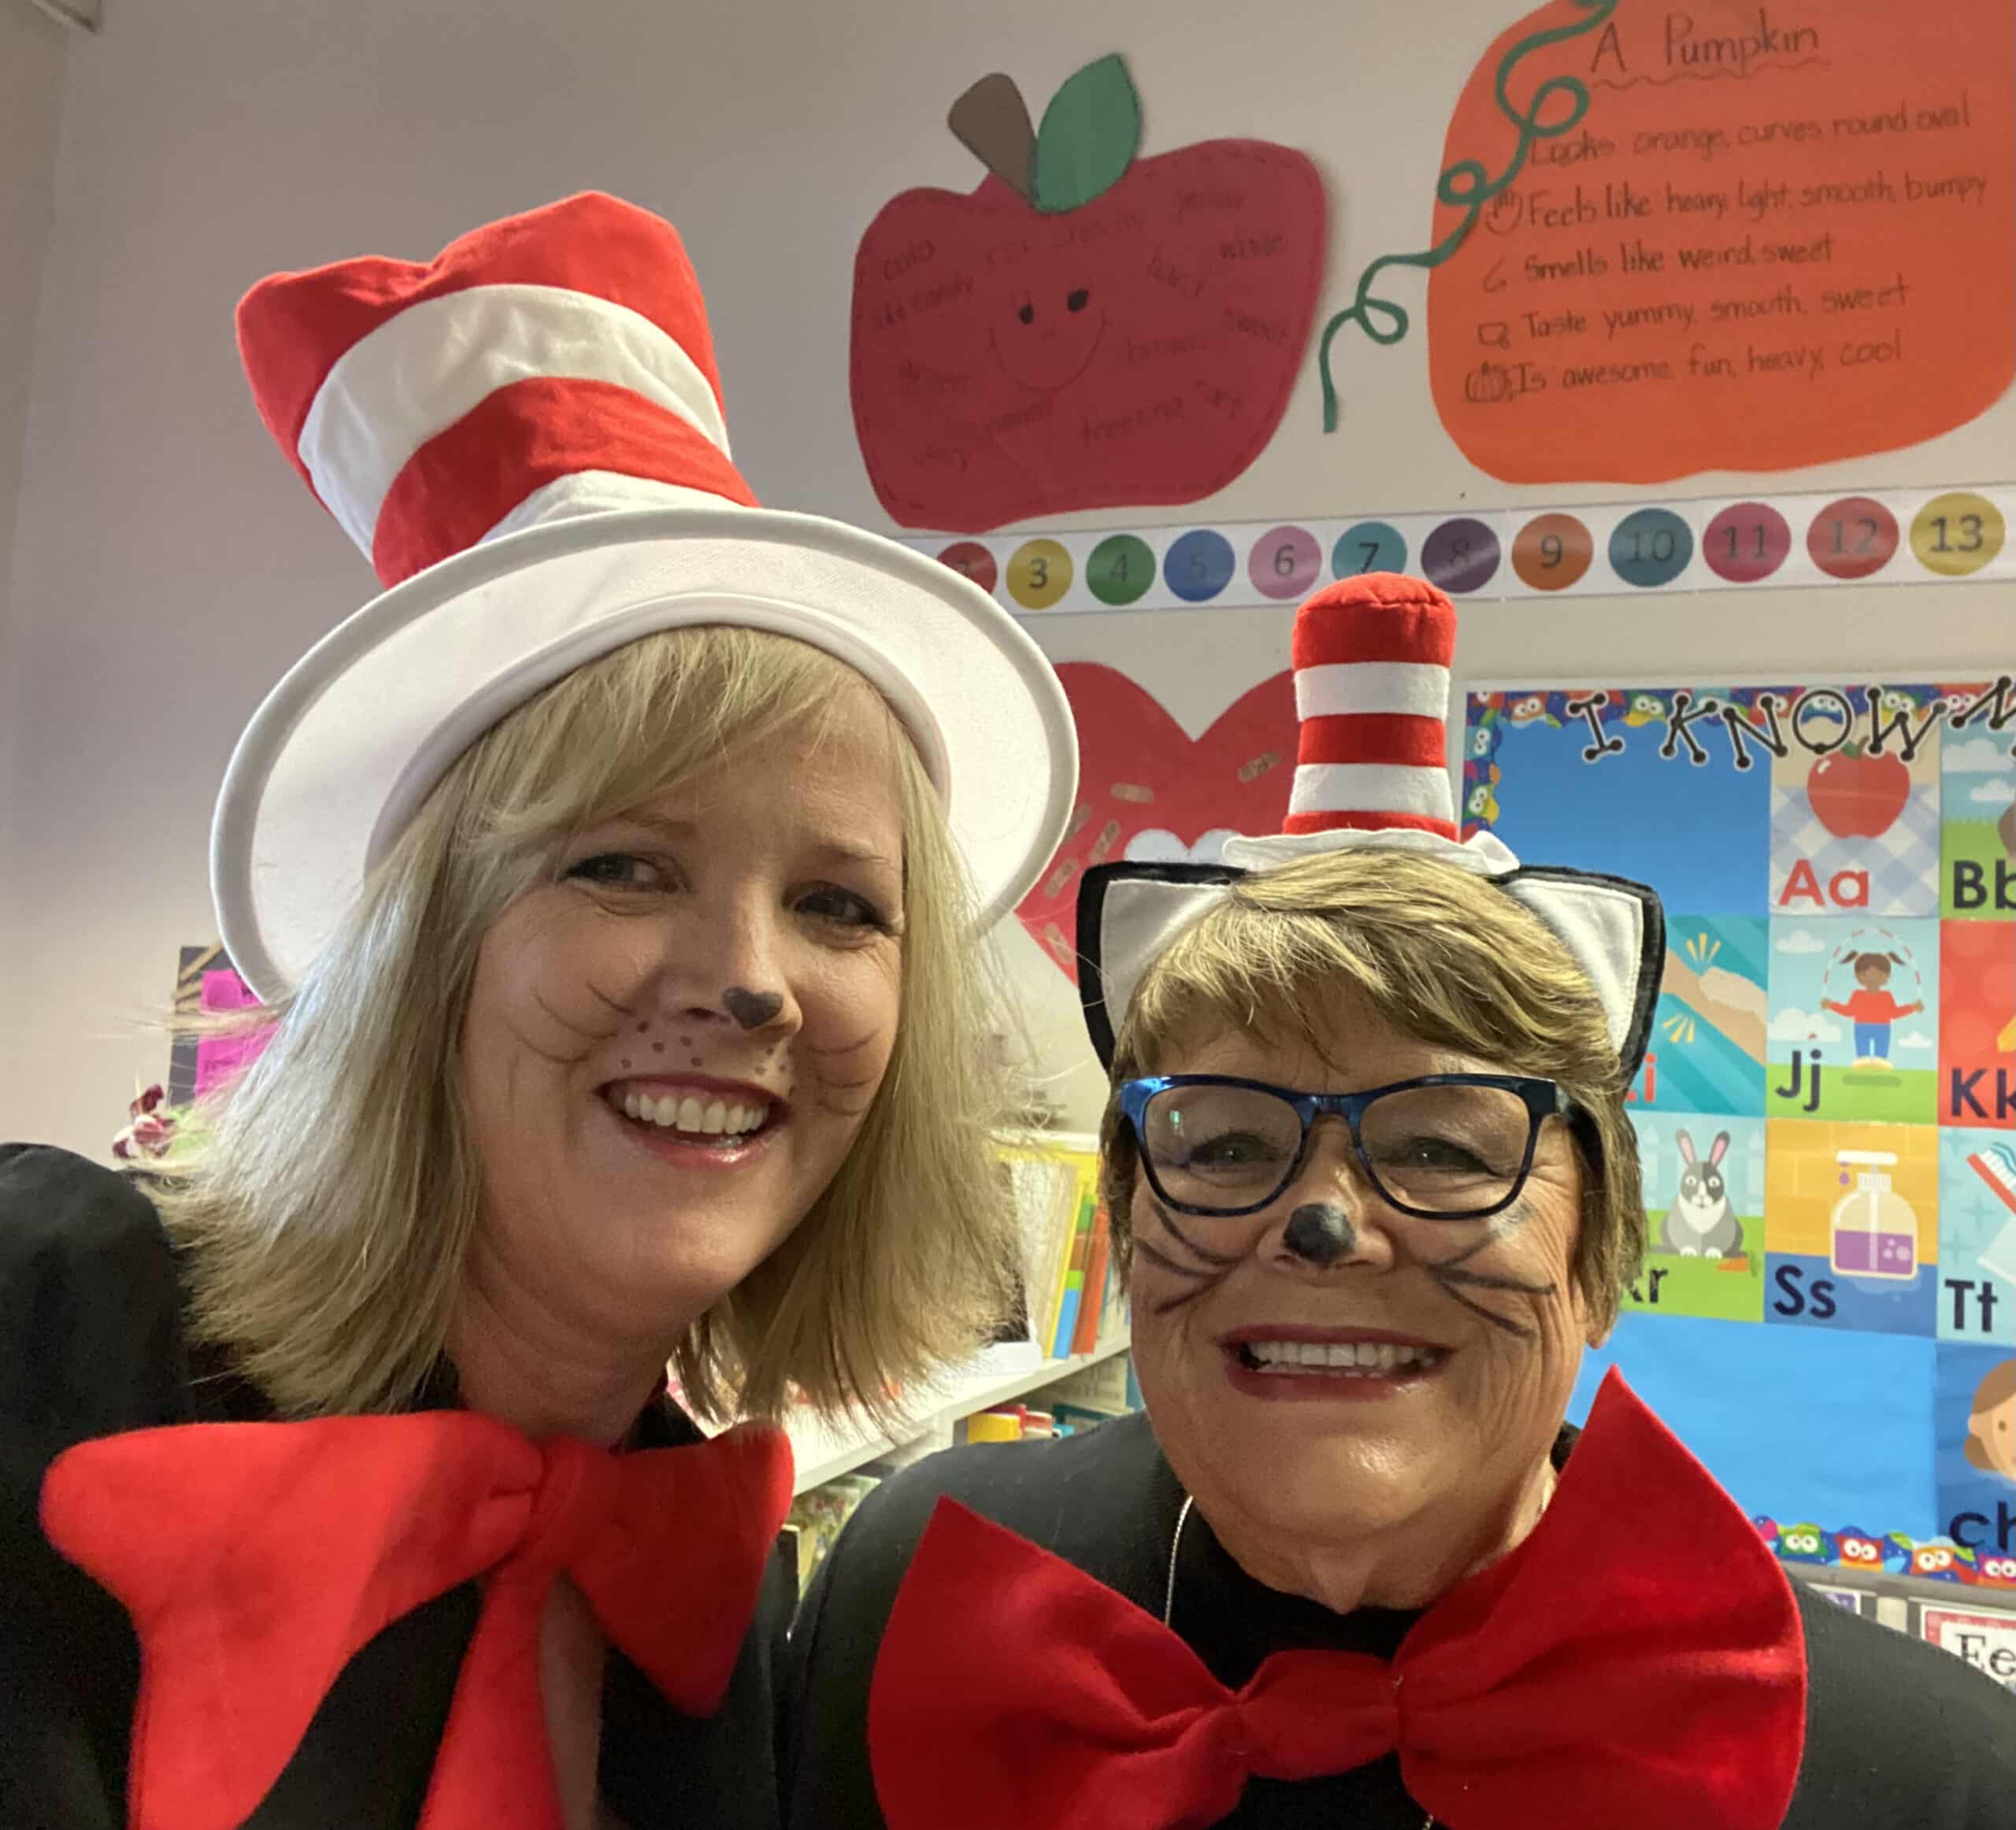 Two women smile while wearing Cat in the Hat costumes from the book by Dr Seuss